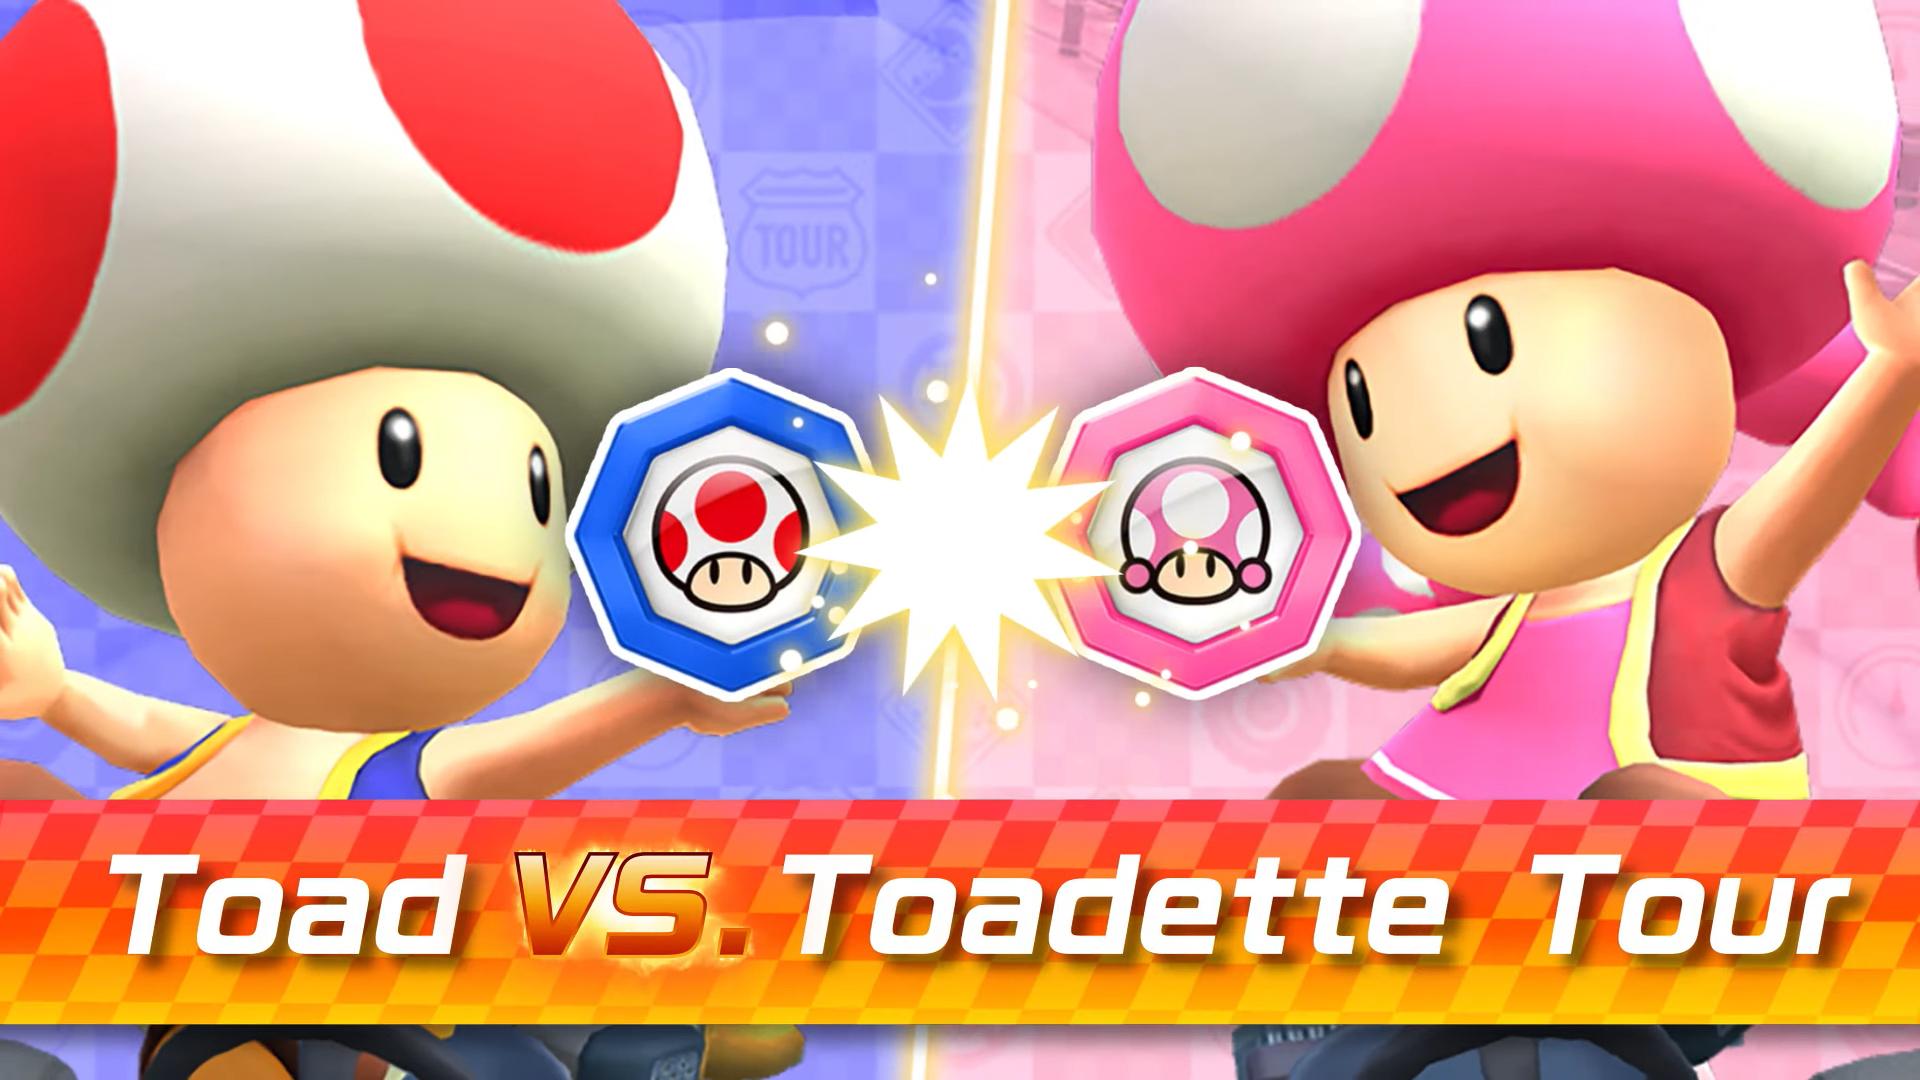 Toadette Wallpapers Top Free Toadette Backgrounds Wallpaperaccess 3687